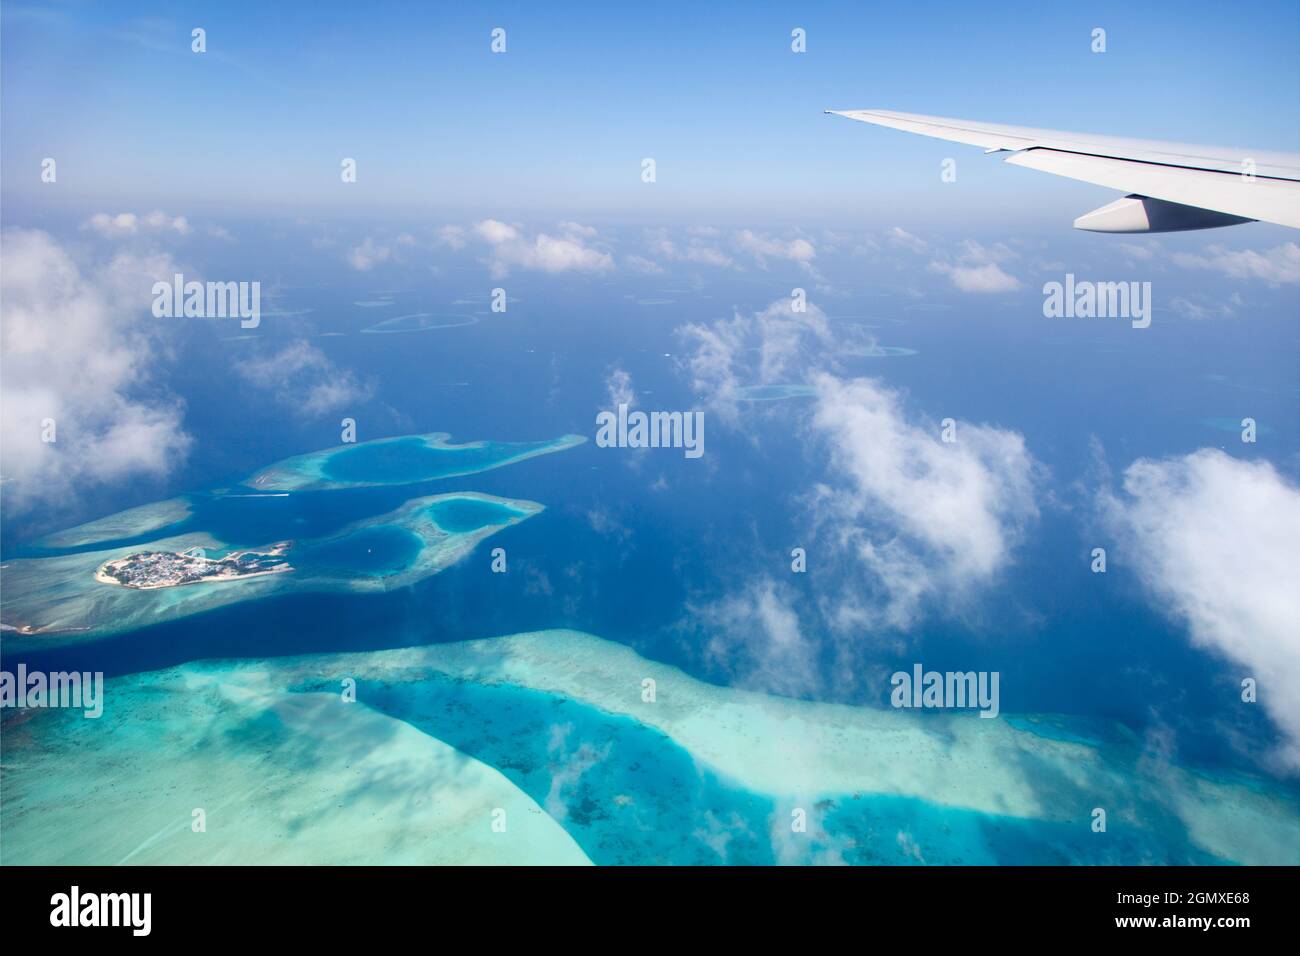 Maldives, Indian Ocean - 8 February 2014; View from the window of an airplane flying above the Maldives in the Indian Ocean. The Maldives is an idylli Stock Photo